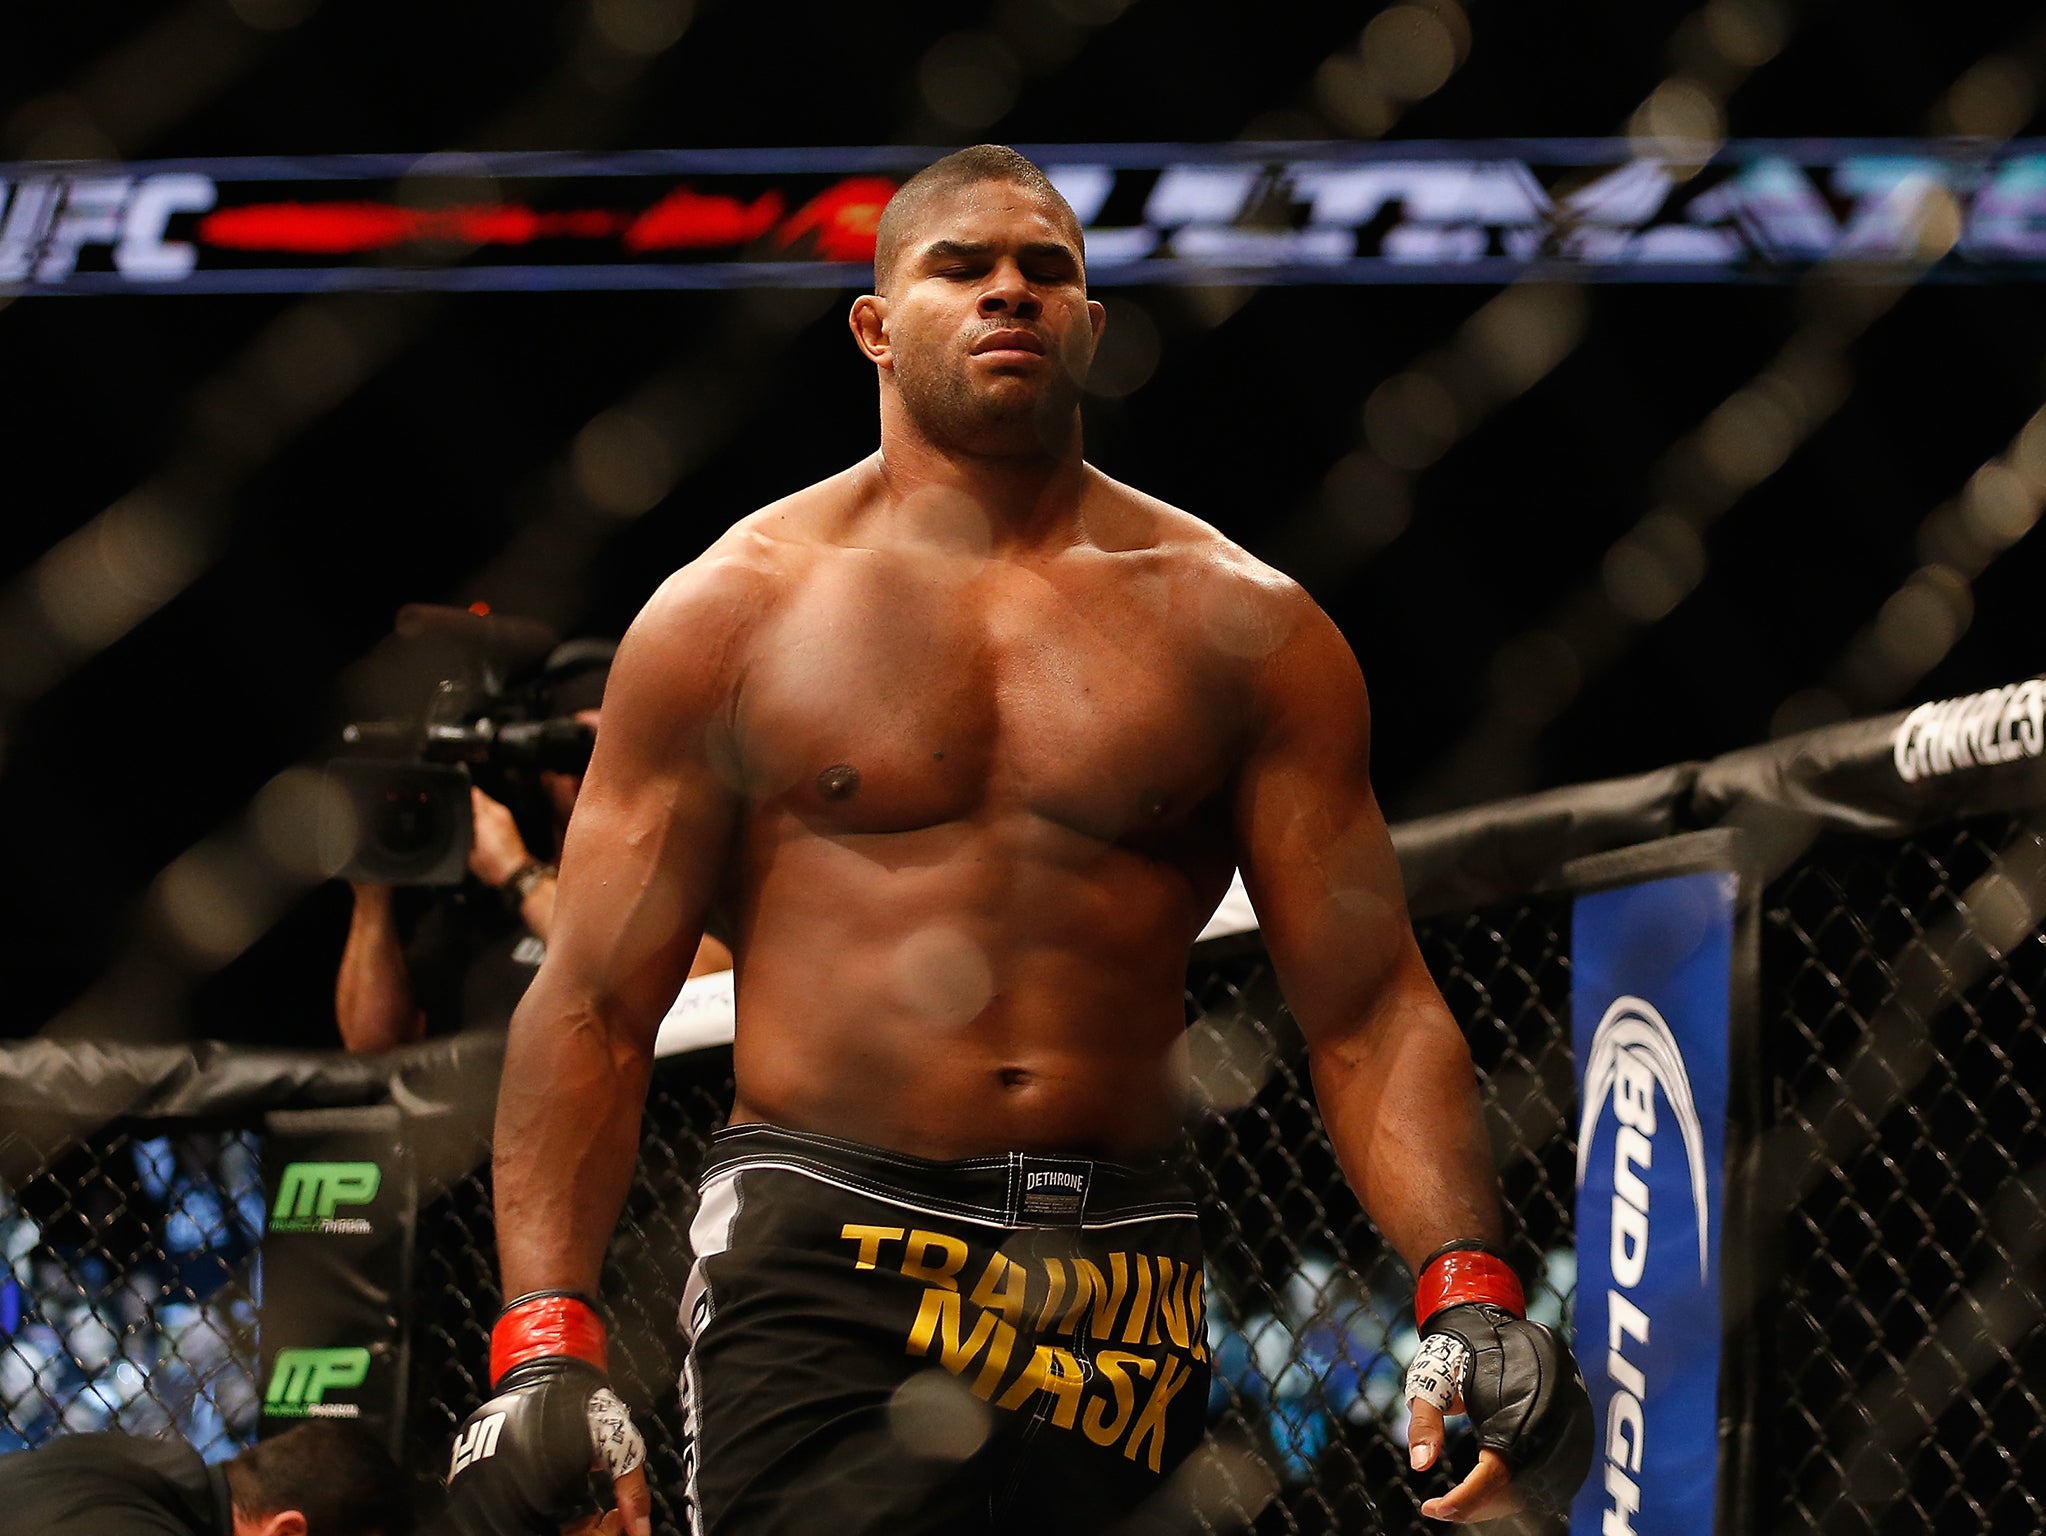 The UFC heavyweight title has long eluded Overeem